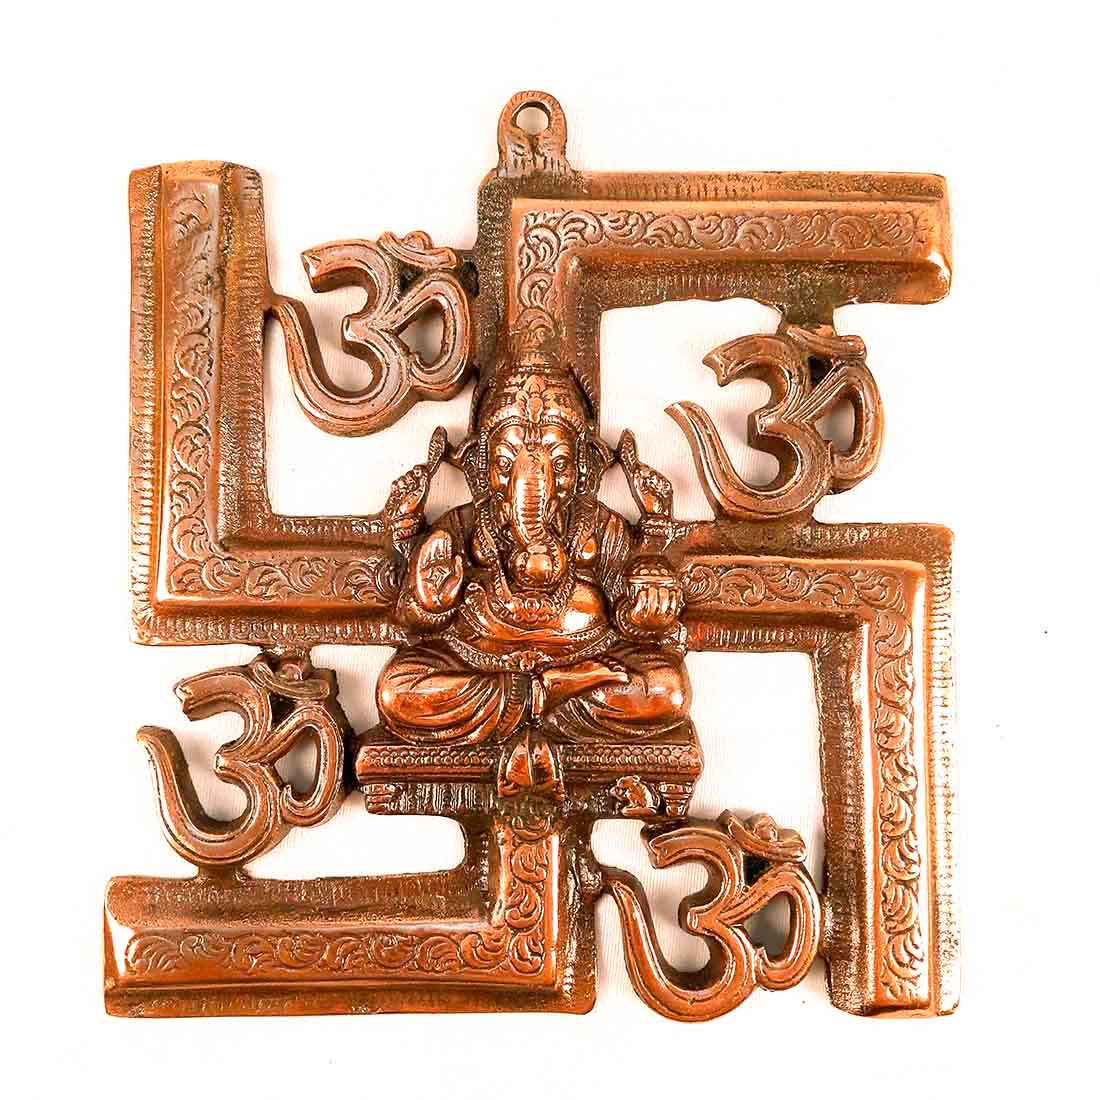 Ganesh Wall Hanging Idol | Lord Ganesha With Swastik And Om Wall Decor Murti for Entrance Door | Ganesha Statue for Vastu, Home, Puja & Religious Decor - 11 Inch